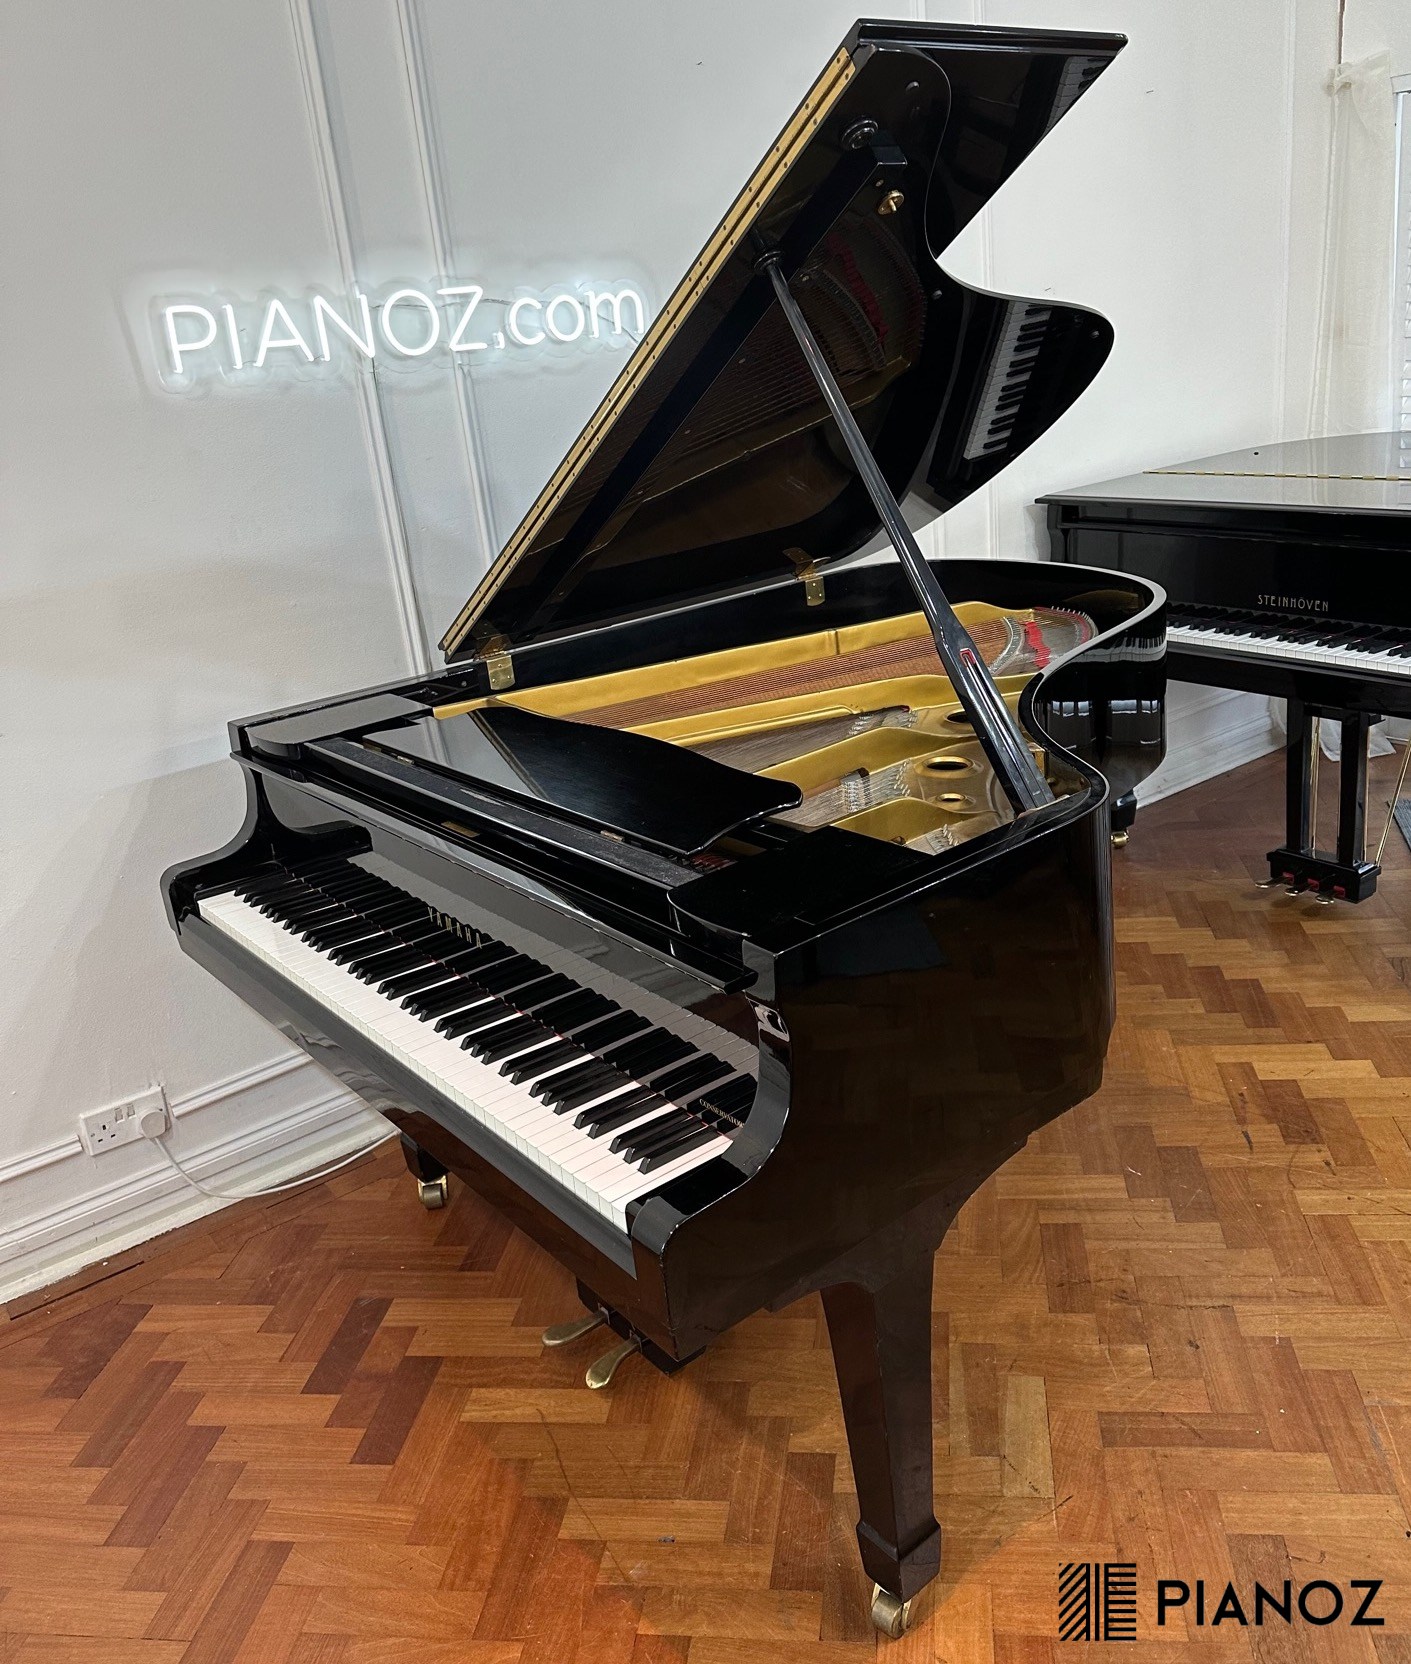 Yamaha C3 Japanese Grand Piano piano for sale in UK